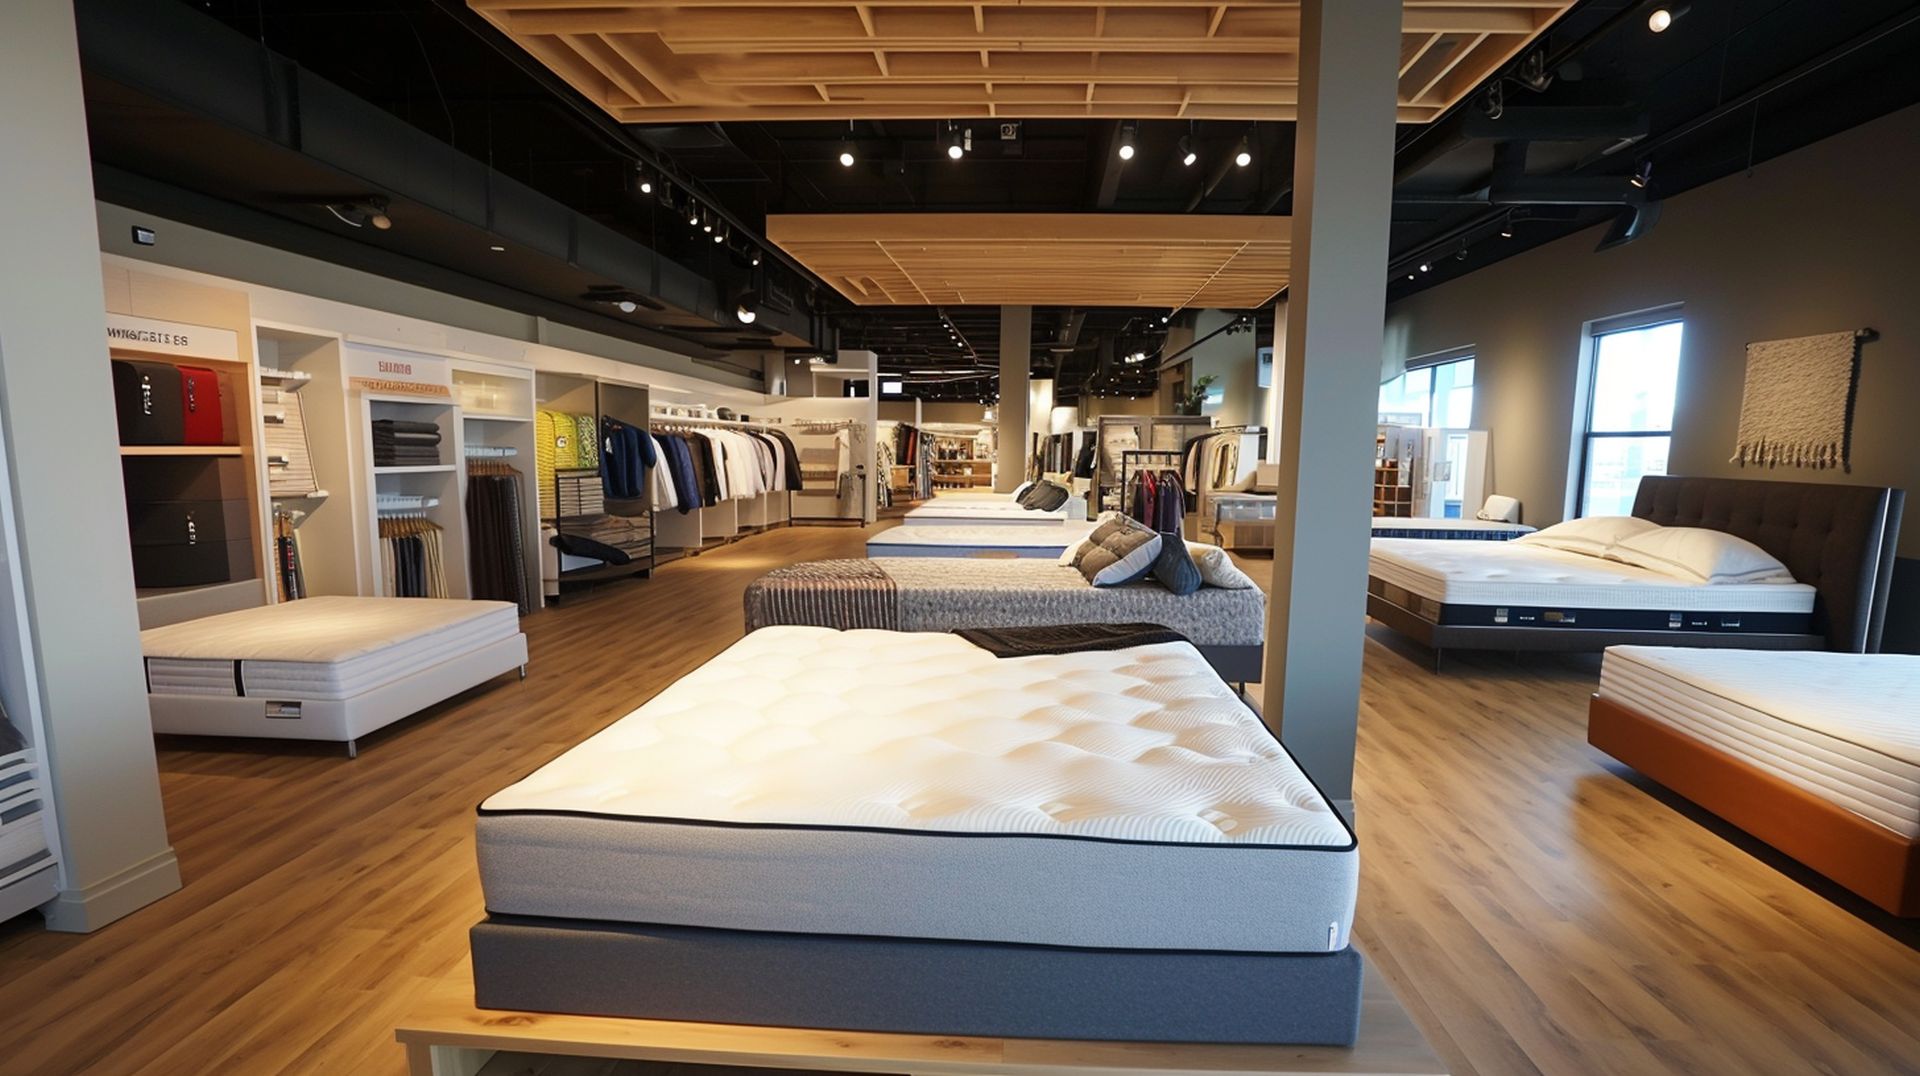 Types of mattresses at mattress dealers in New York City, NY